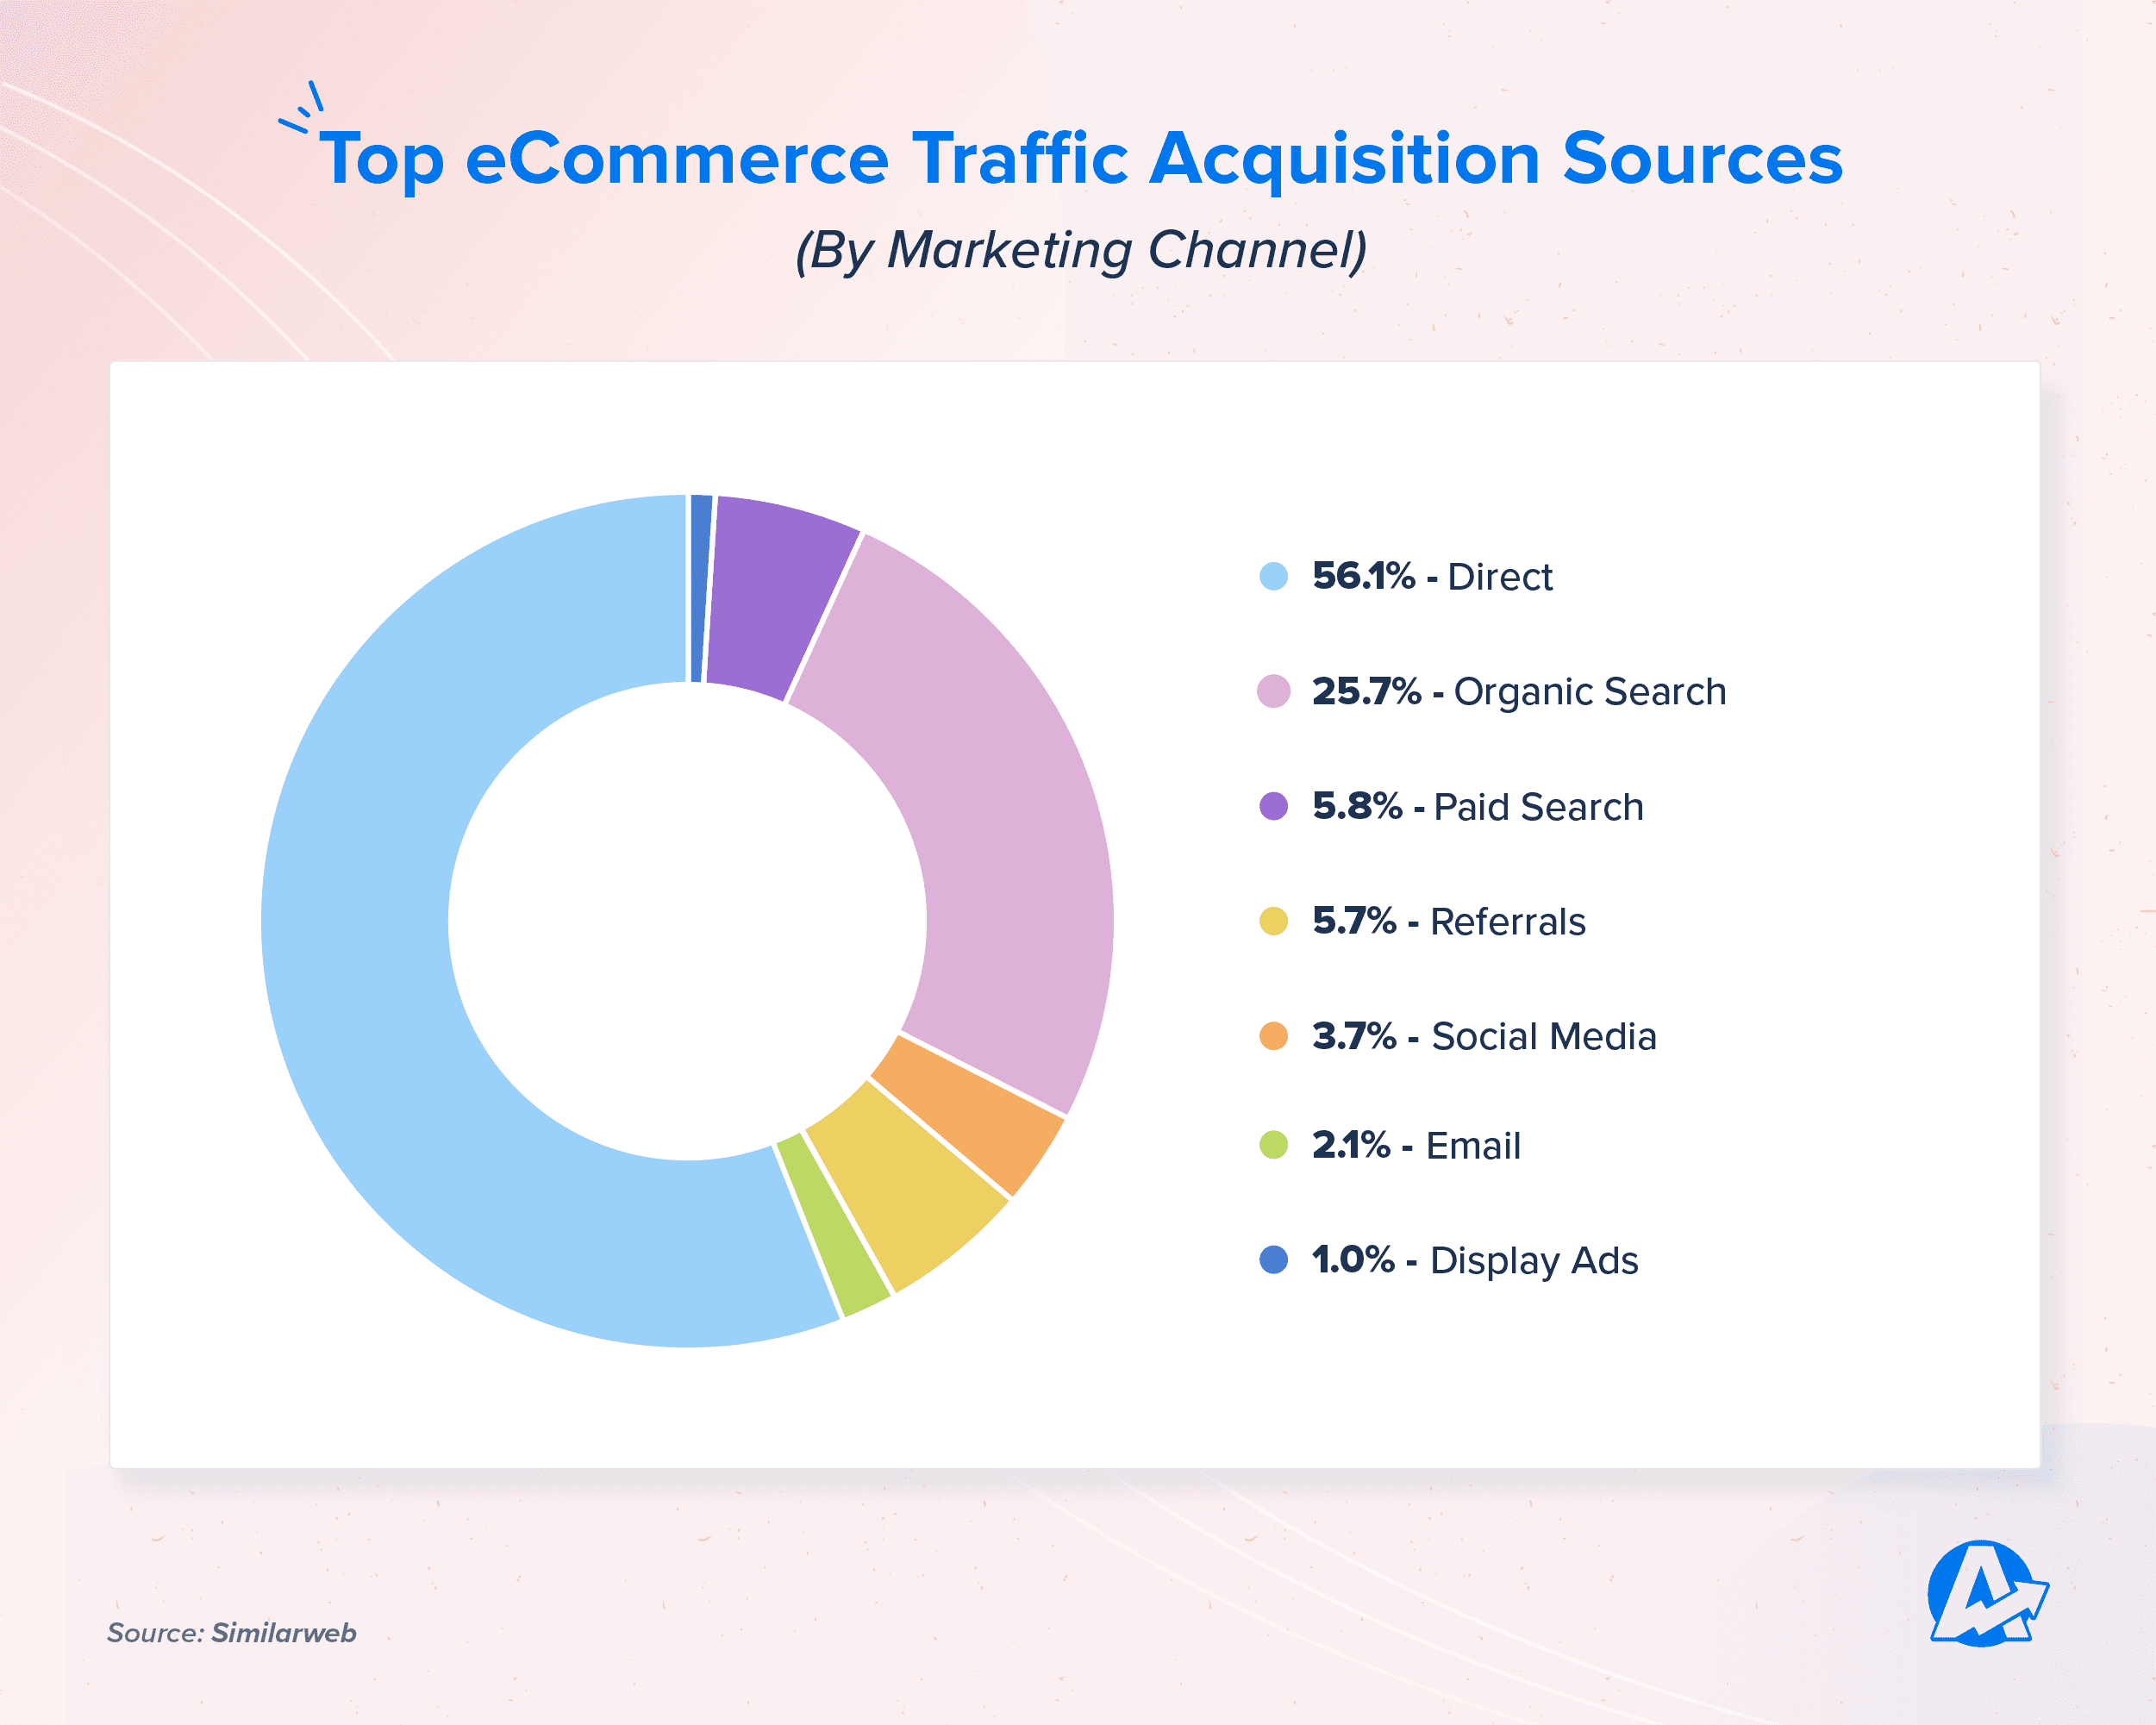 Top eCommerce Traffic Acquisition Sources by Marketing Channel